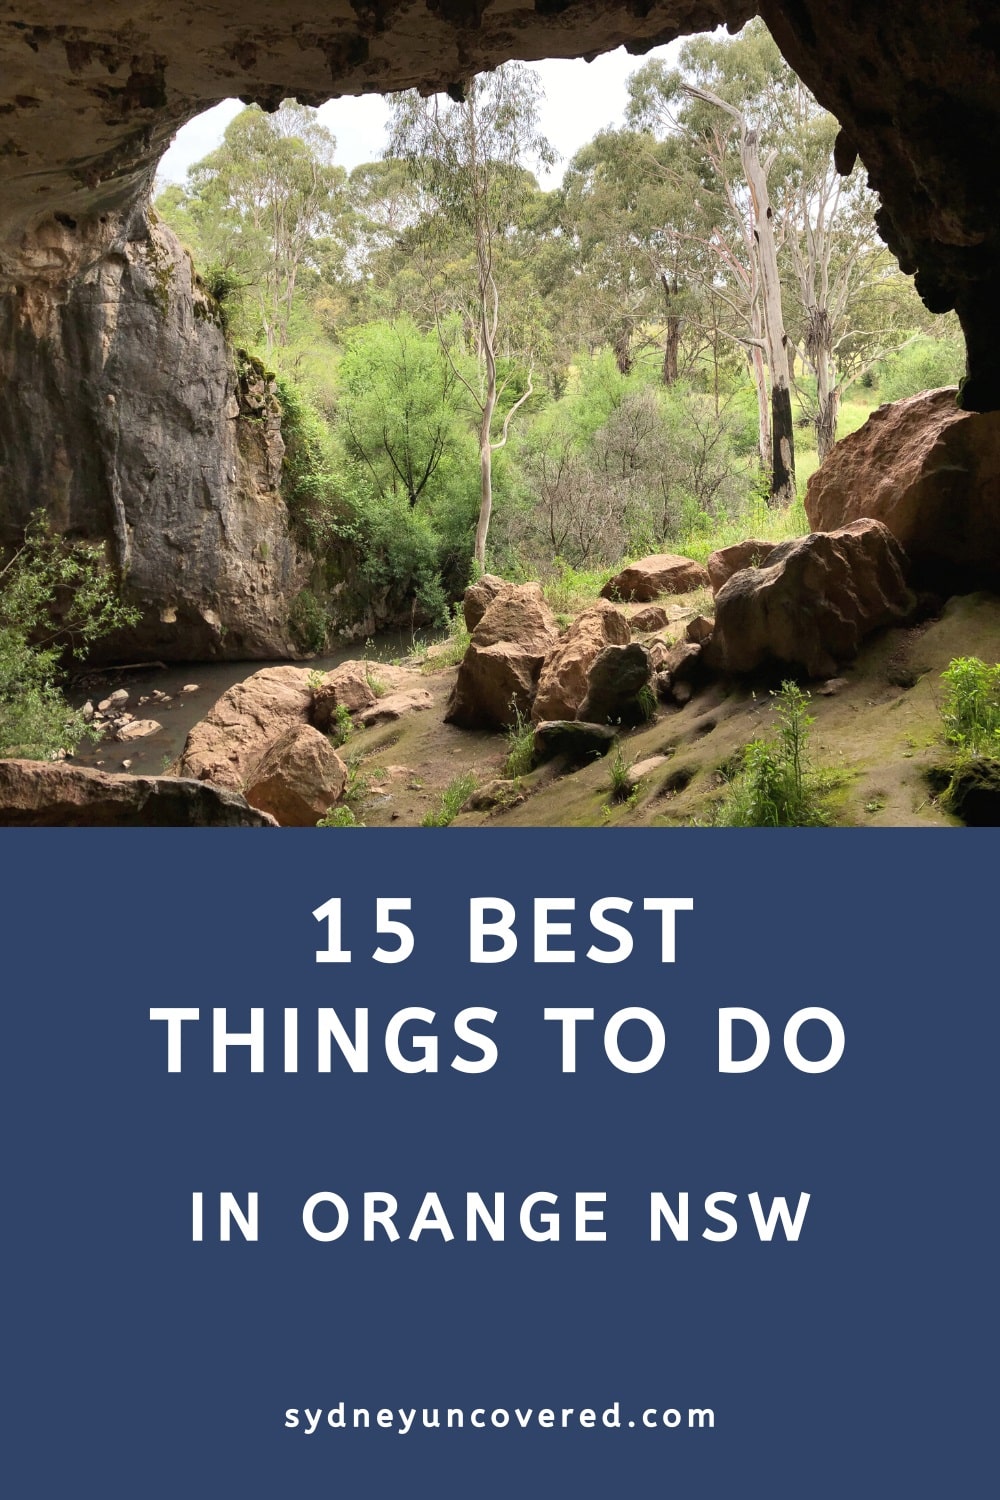 15 Best things to do in Orange NSW